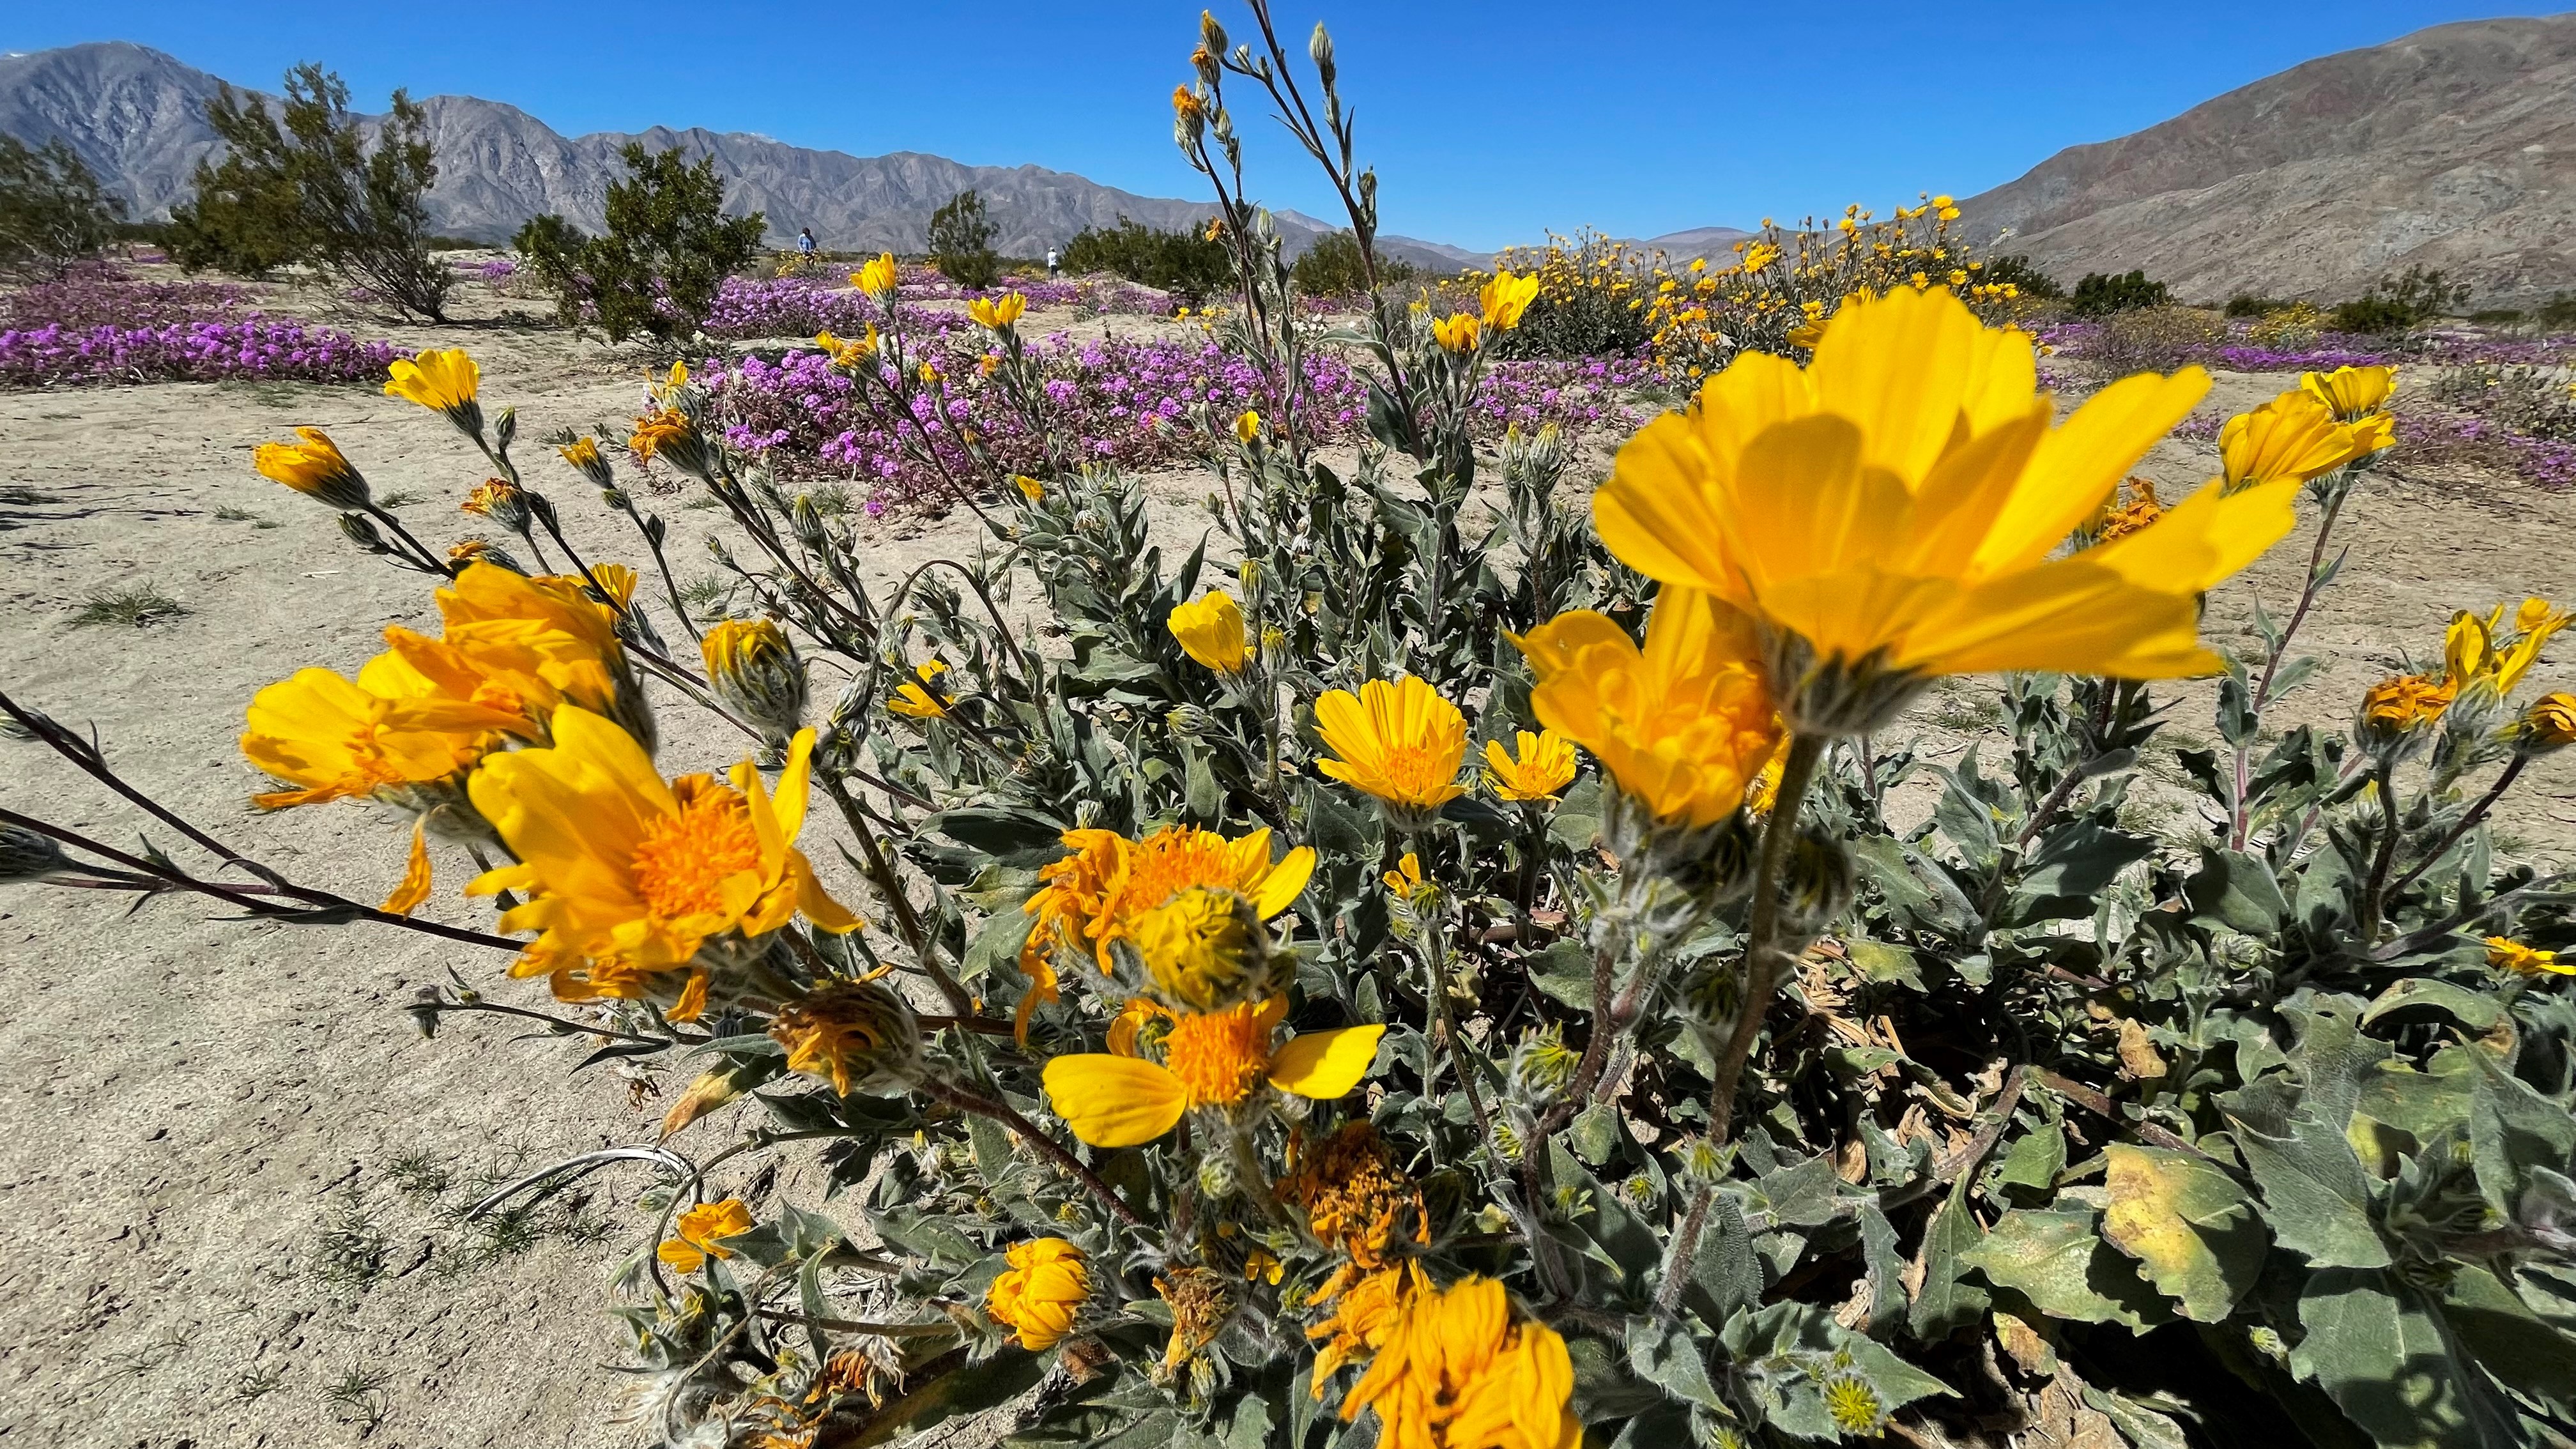 An Unusual 'Super Bloom' is Happening in the Anza-Borrego Desert State  Park. Here's Why – NBC 7 San Diego